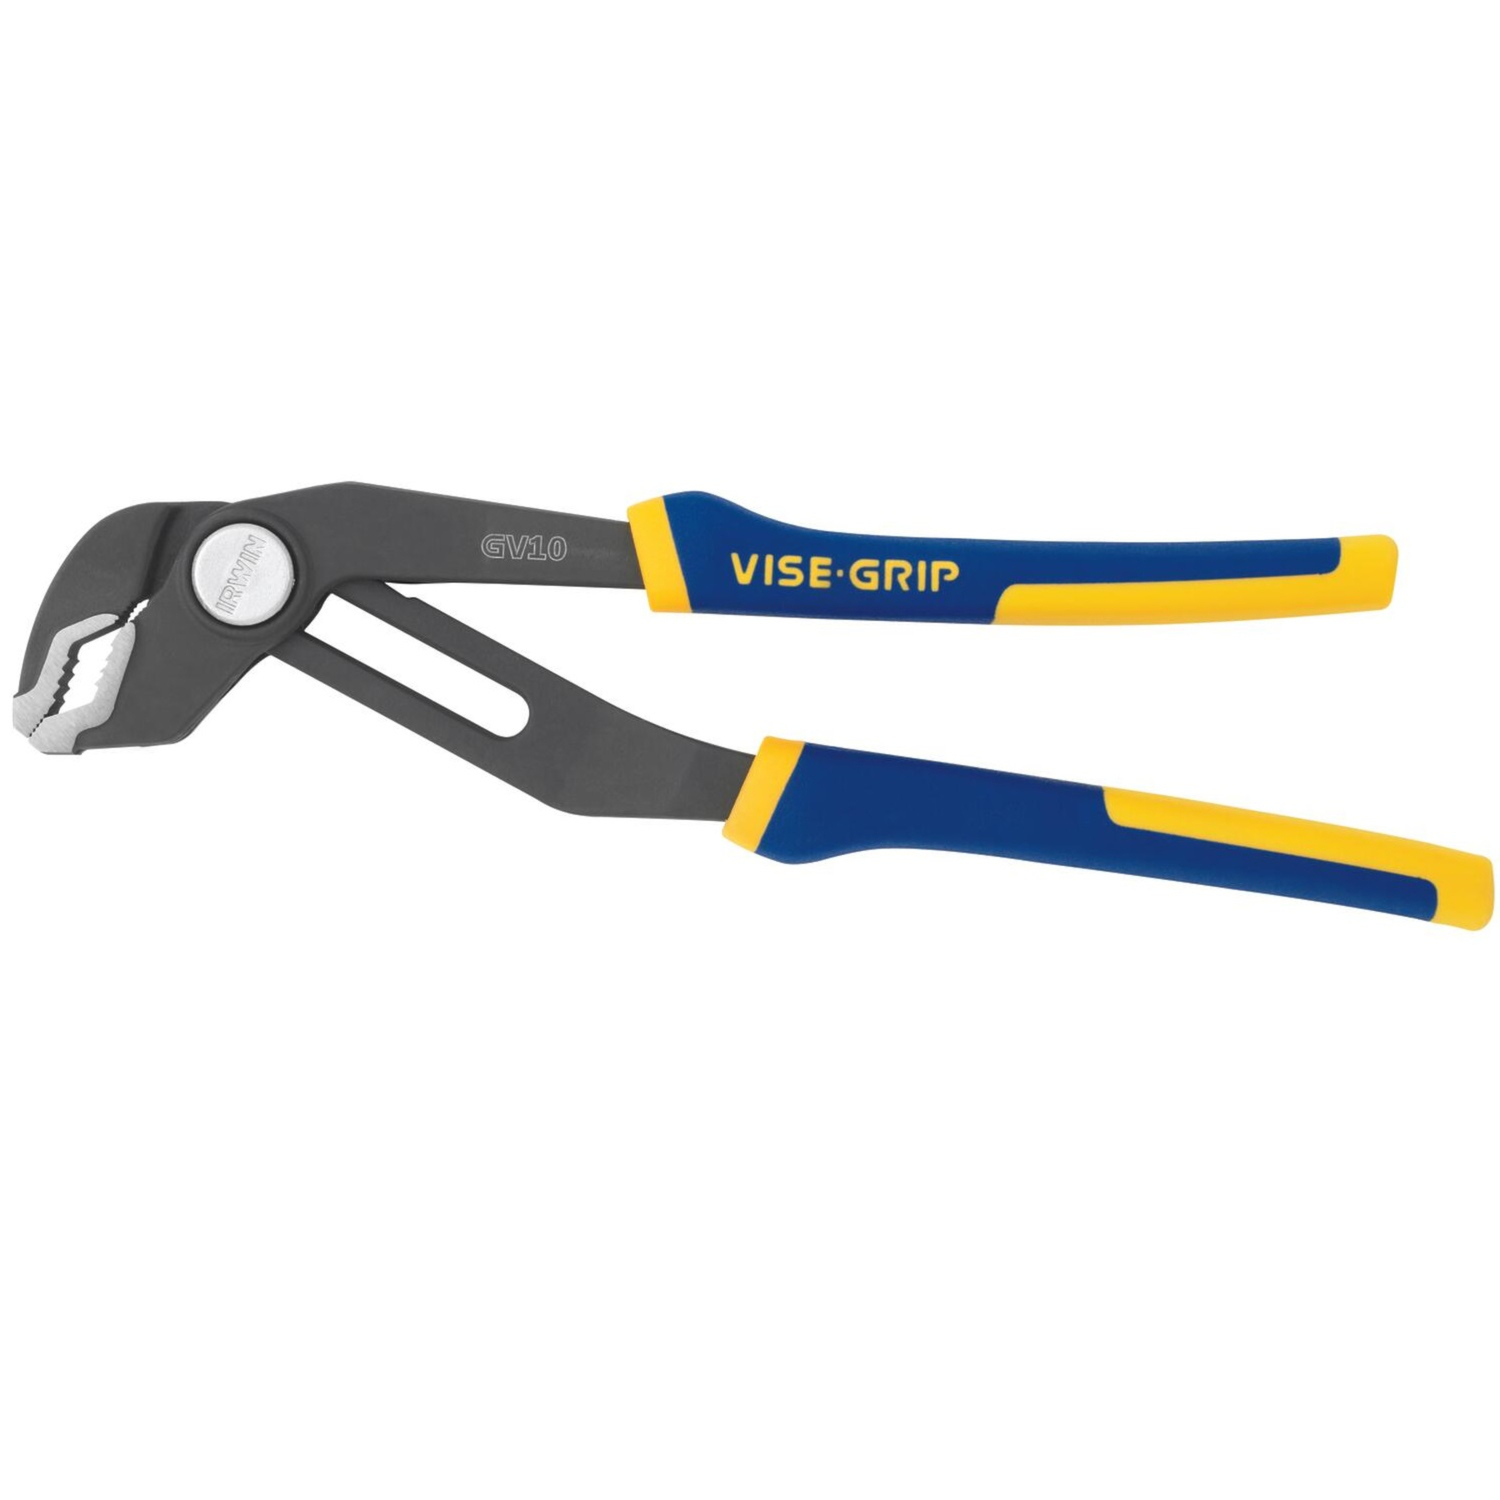 Photos - Pliers IRWIN Vise-Grip 10 in. Alloy Steel Tongue and Groove  2078110 